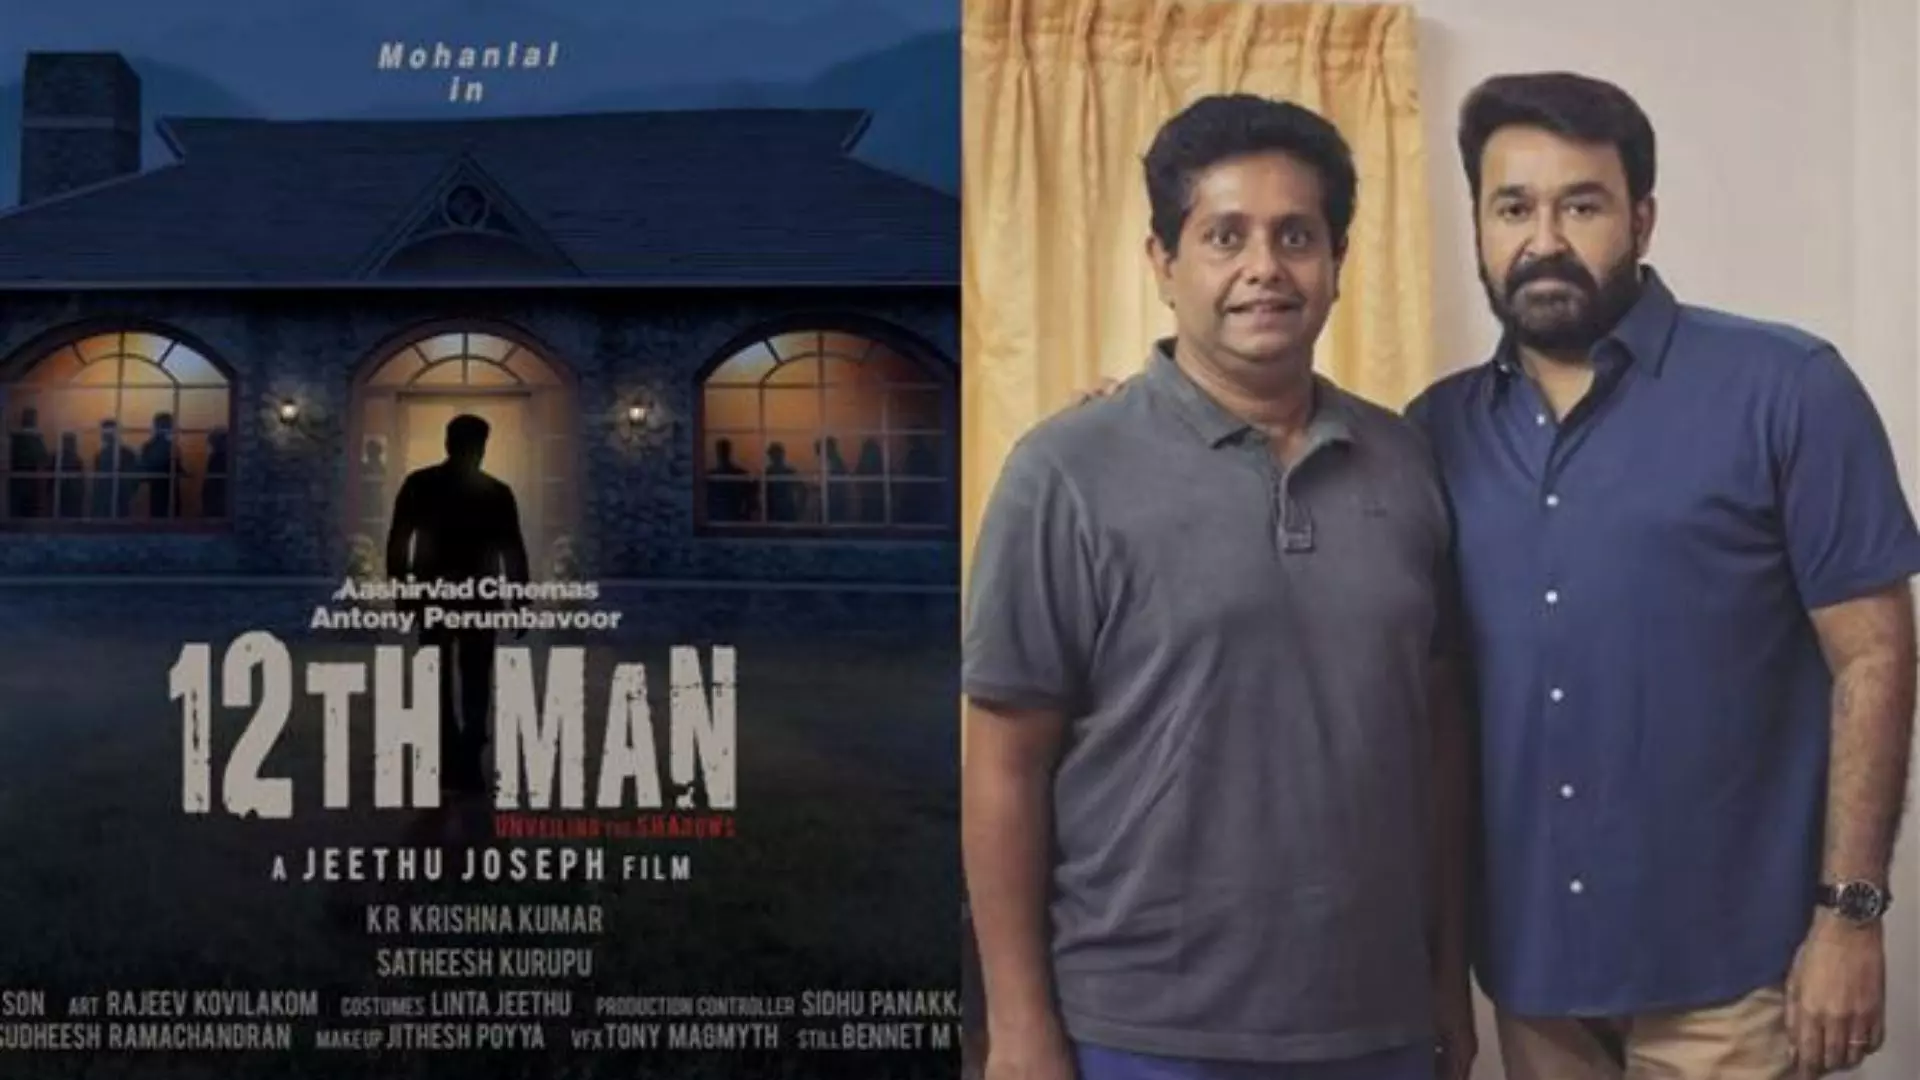 Mohanlal Announced his New Movie 12th Man With Drishyam 2 Director Jeethu Joseph